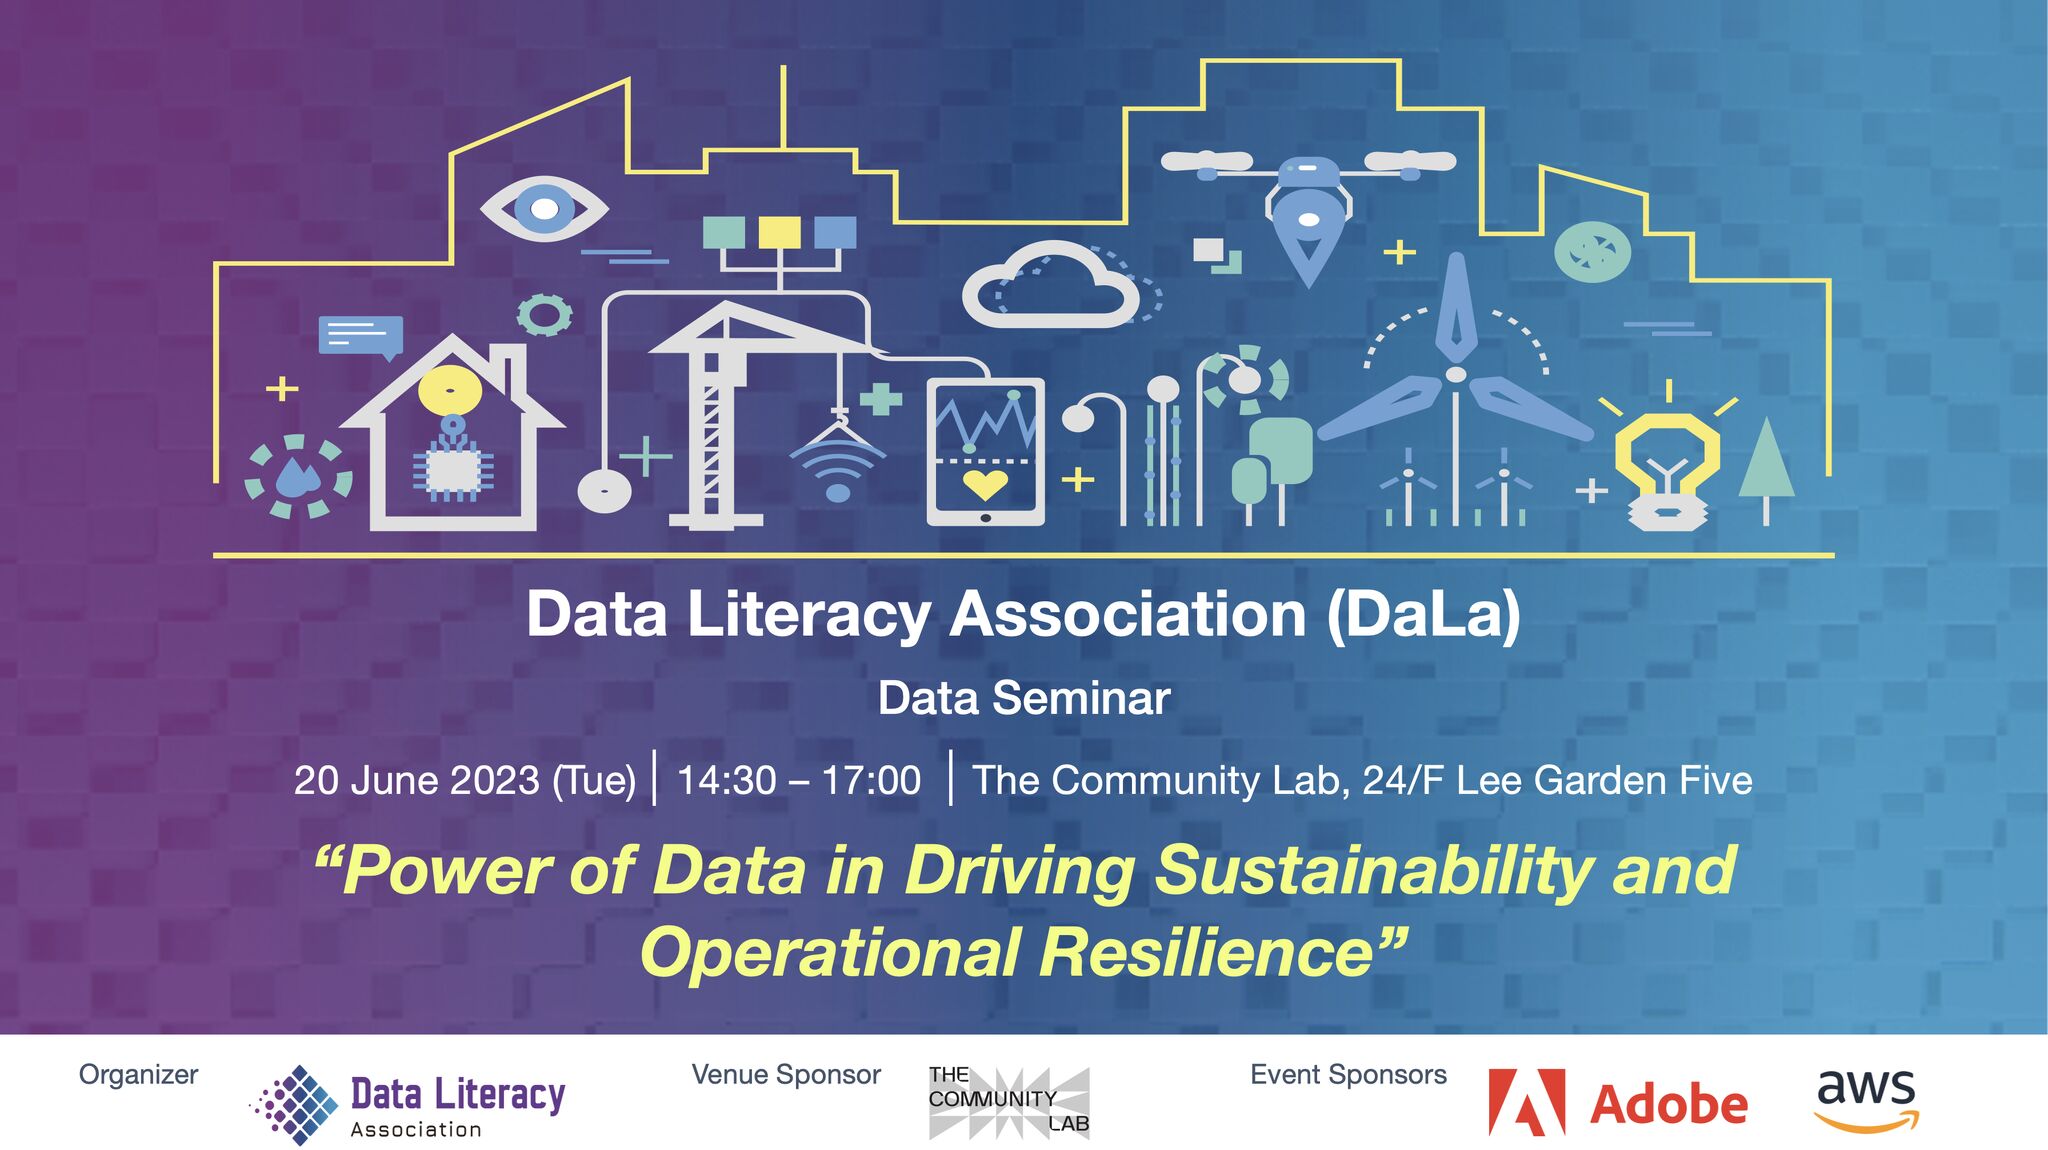 Data Seminar on 20Jun – “Power of Data in Driving Sustainability and Operational Resilience